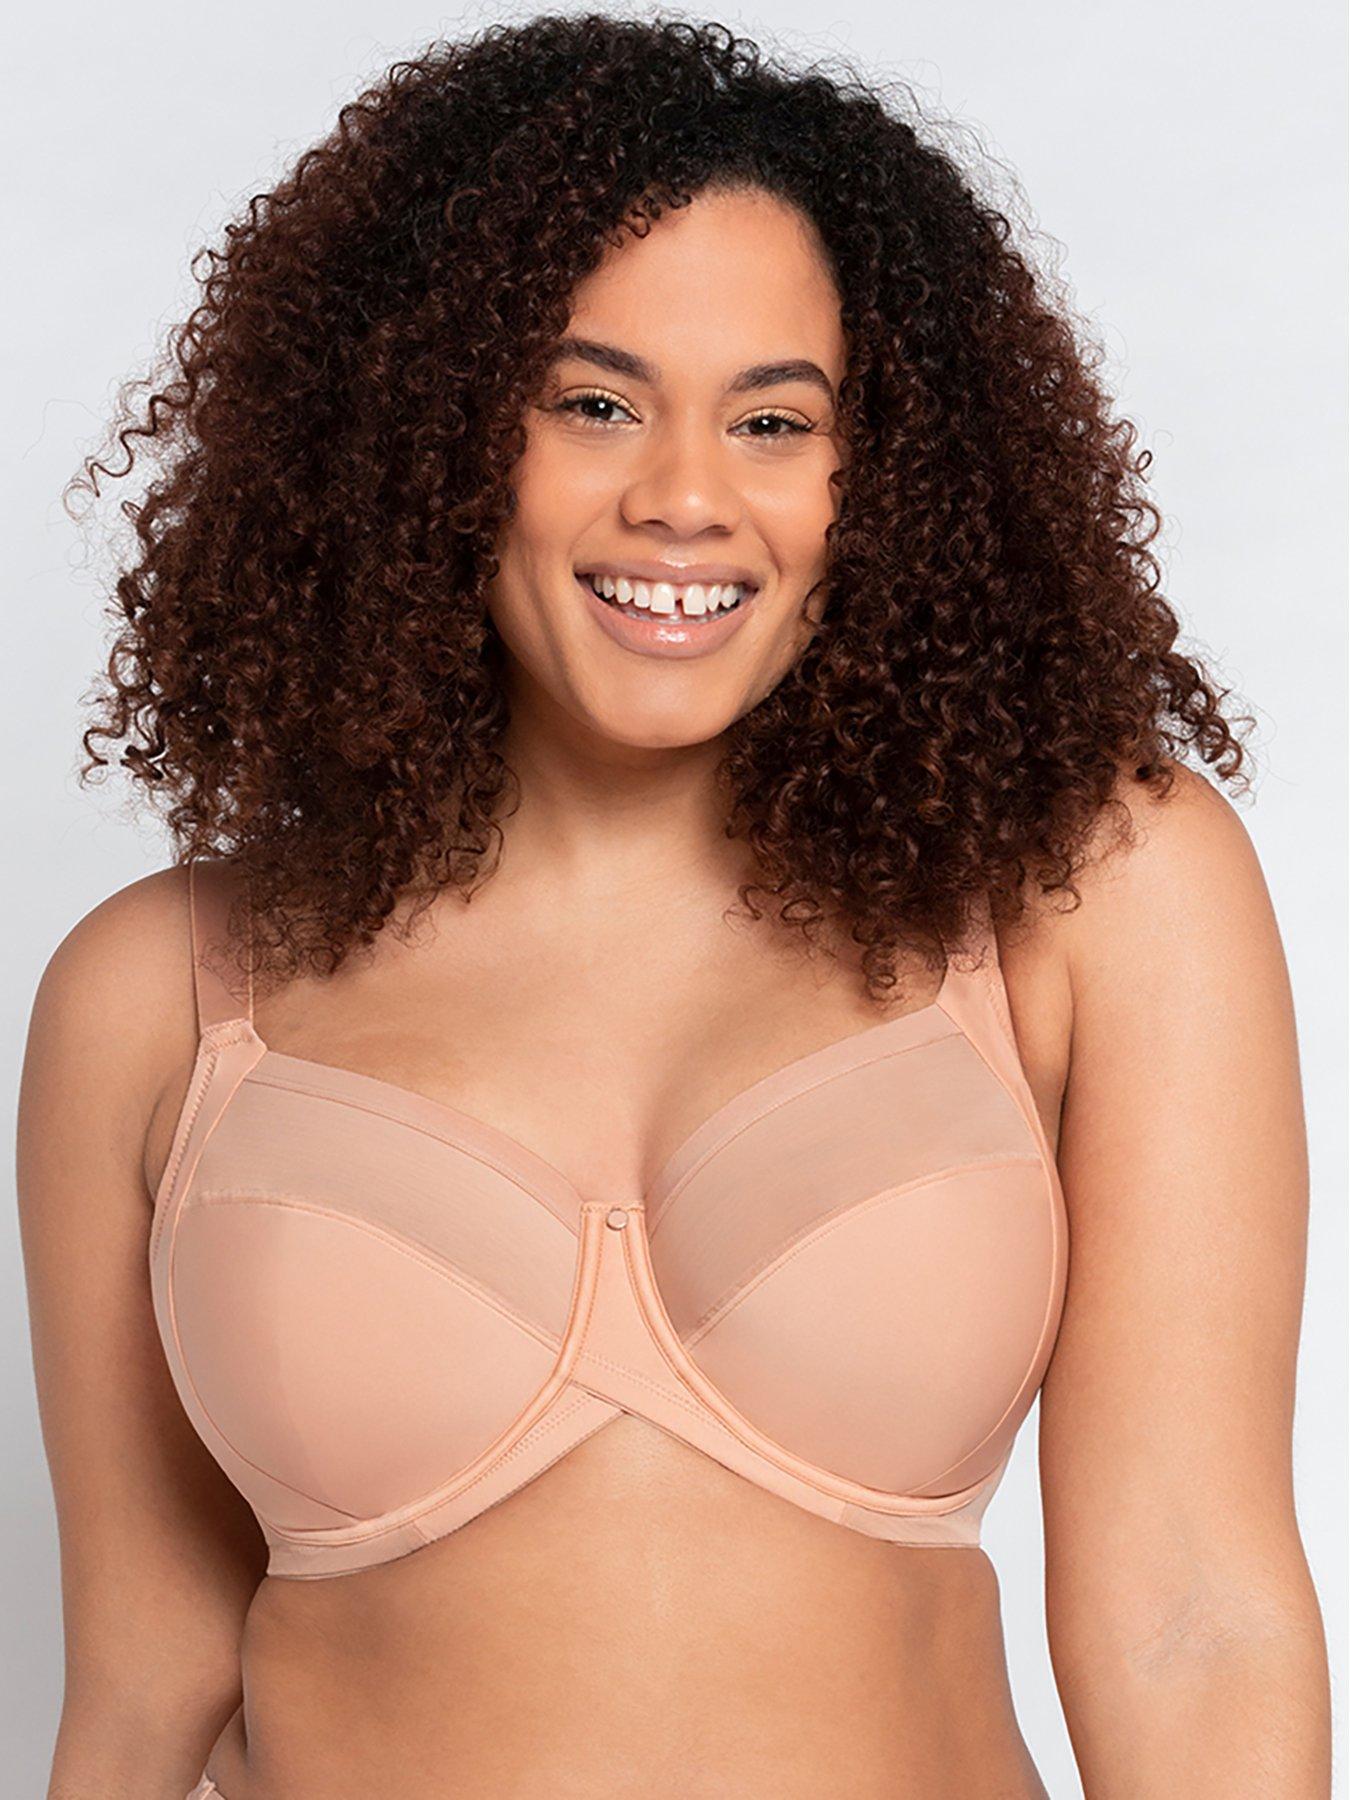 Curvy Kate Wonderfully Full Cup Bra in Orchid FINAL SALE (25% Off) - Busted  Bra Shop